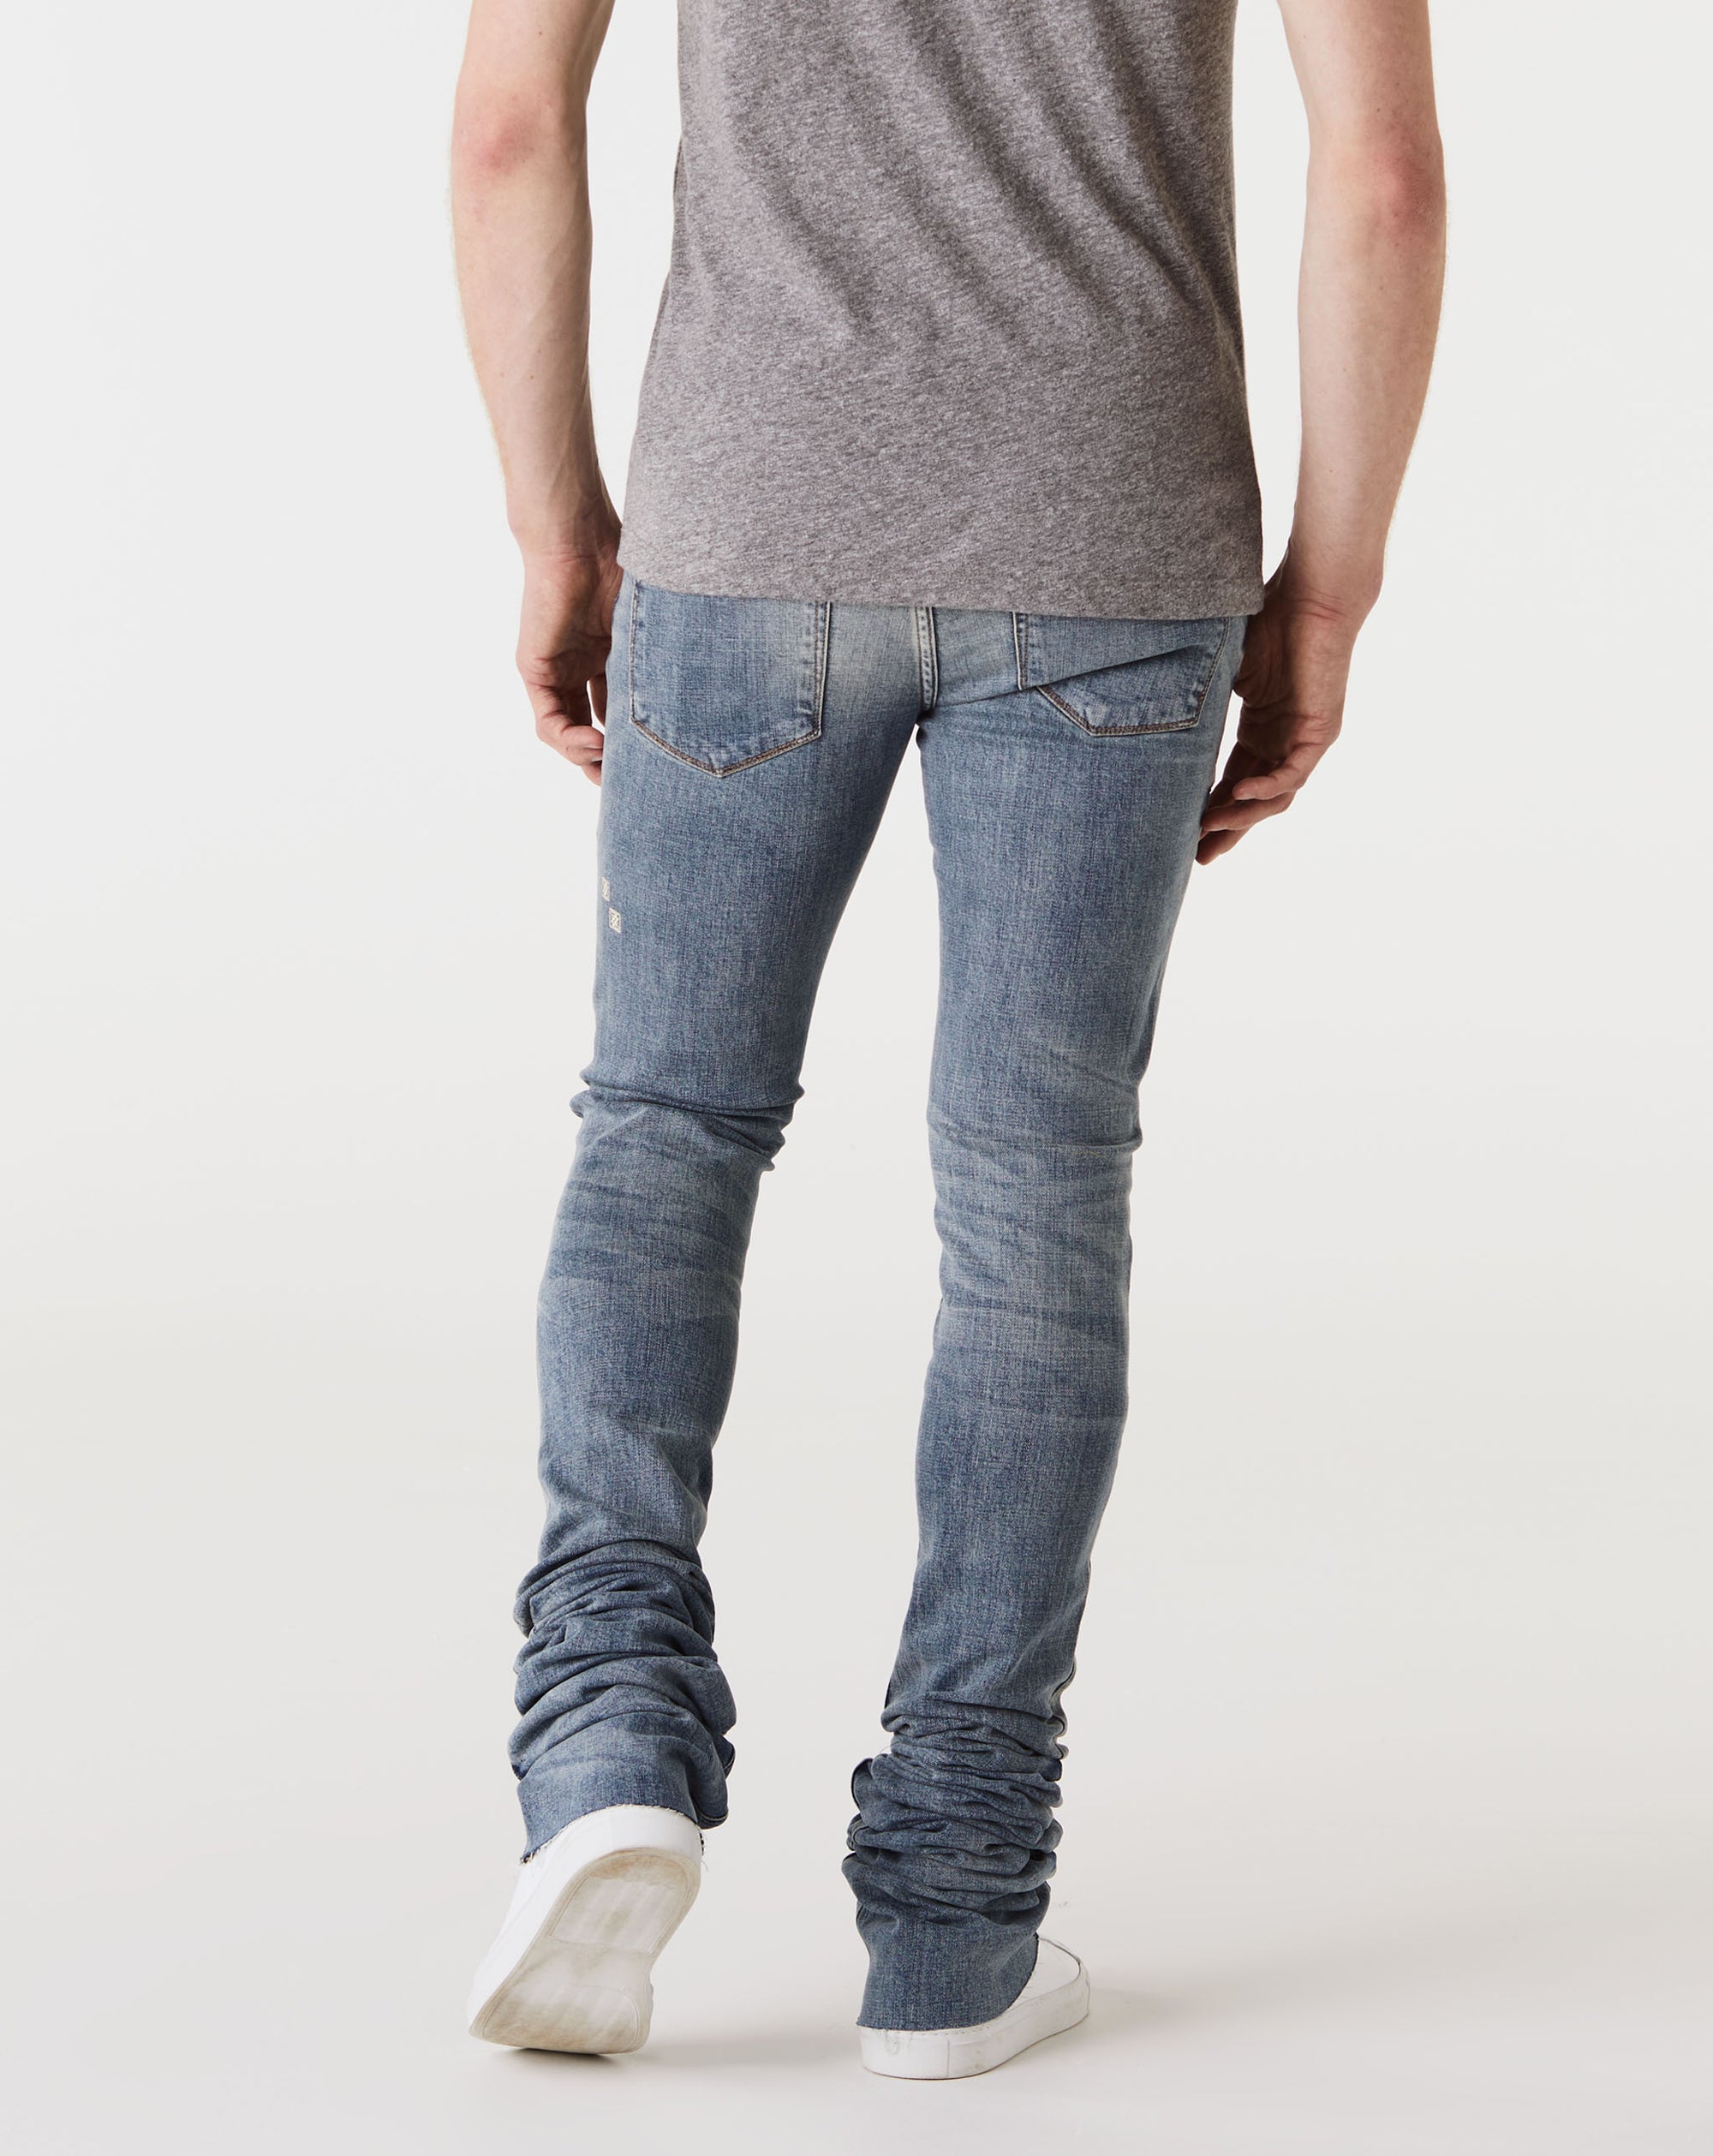 Shabazz Barcelona Stacked Jean - Rule of Next Apparel